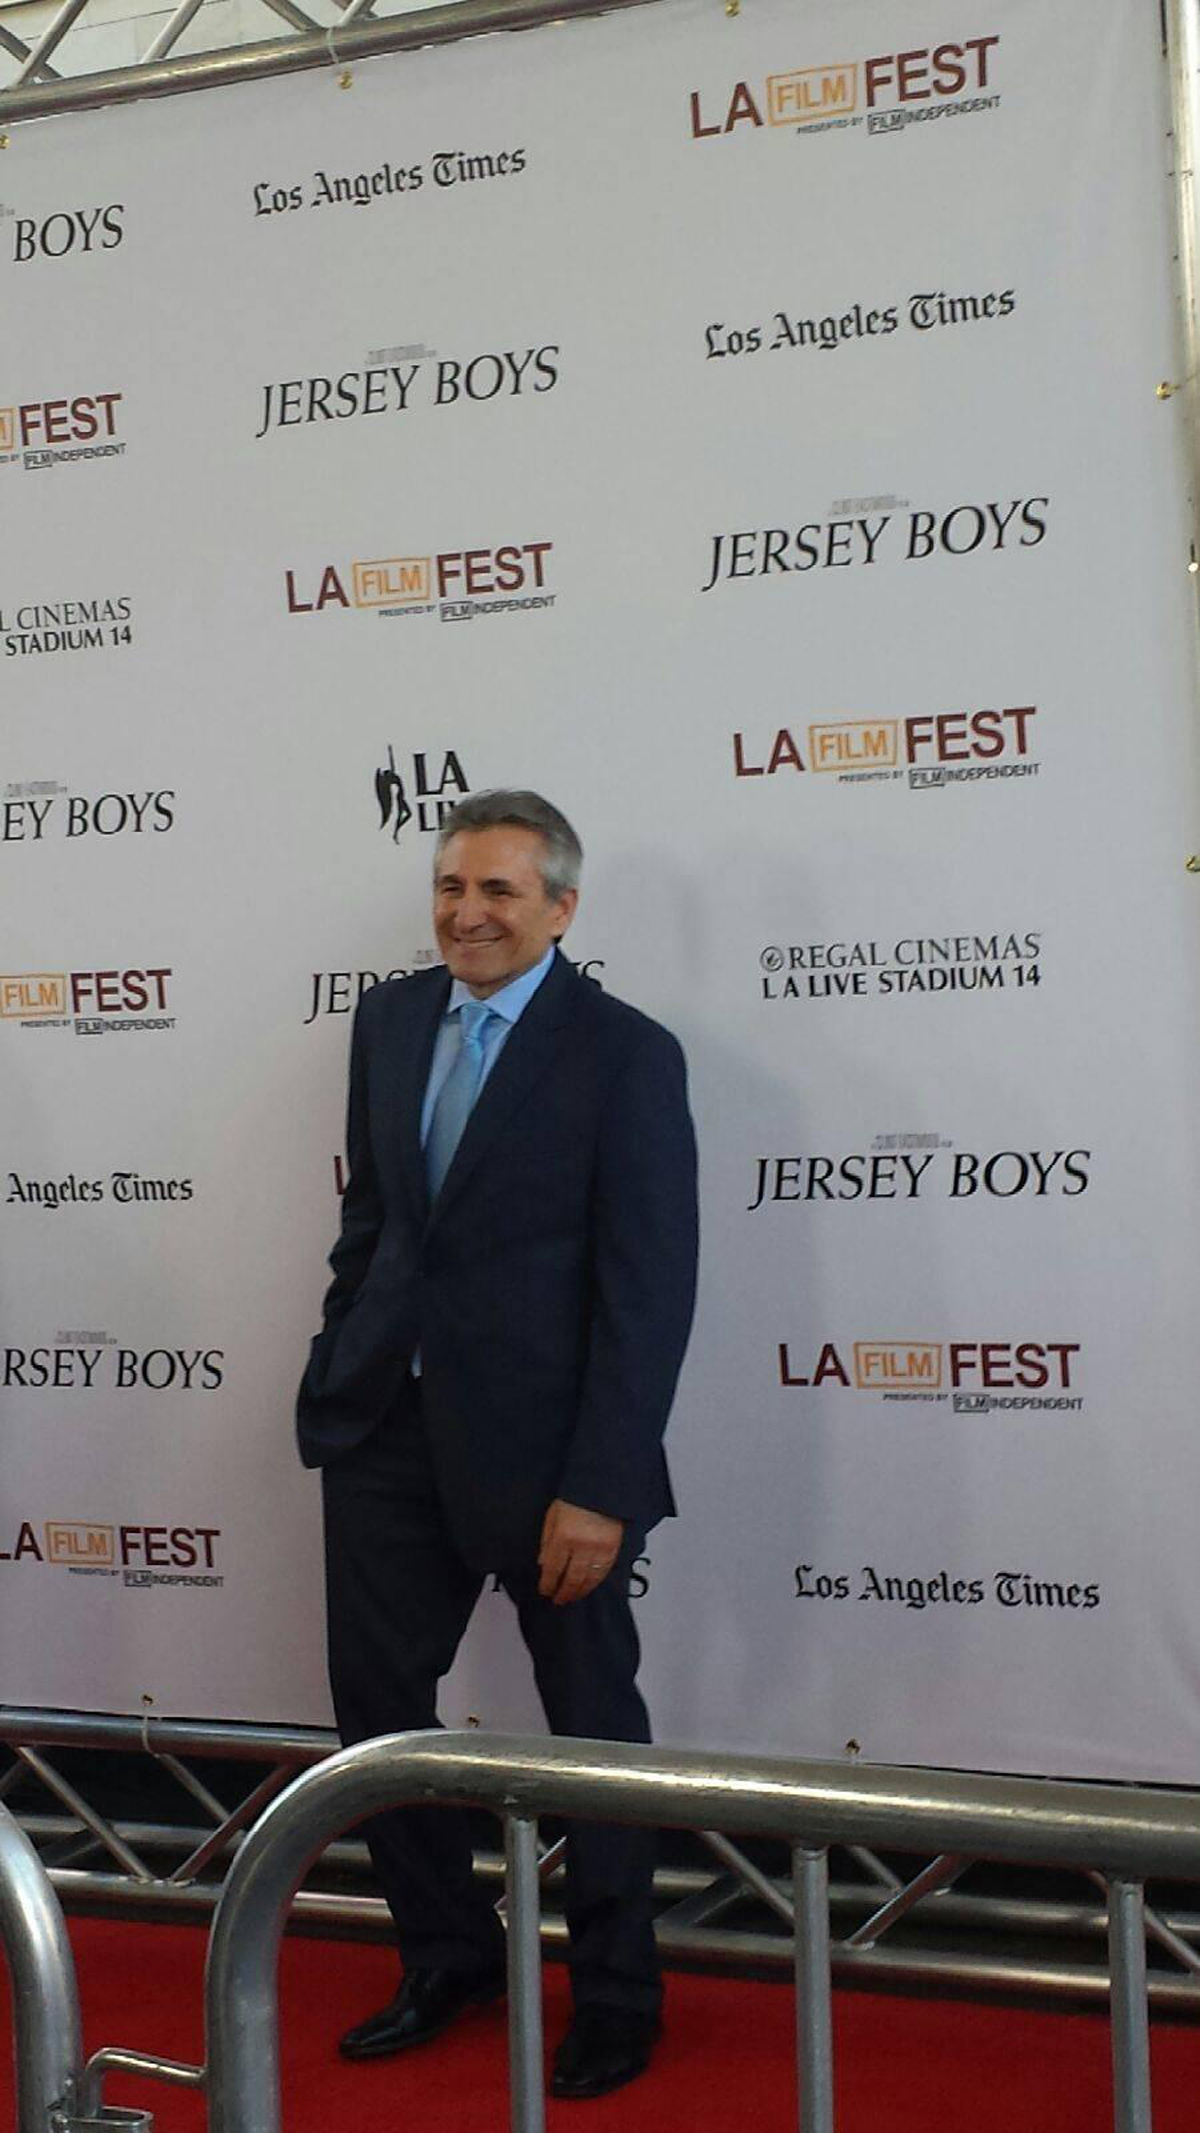 Lou Volpe on red carpet for the Jersey Boys movie premiere.